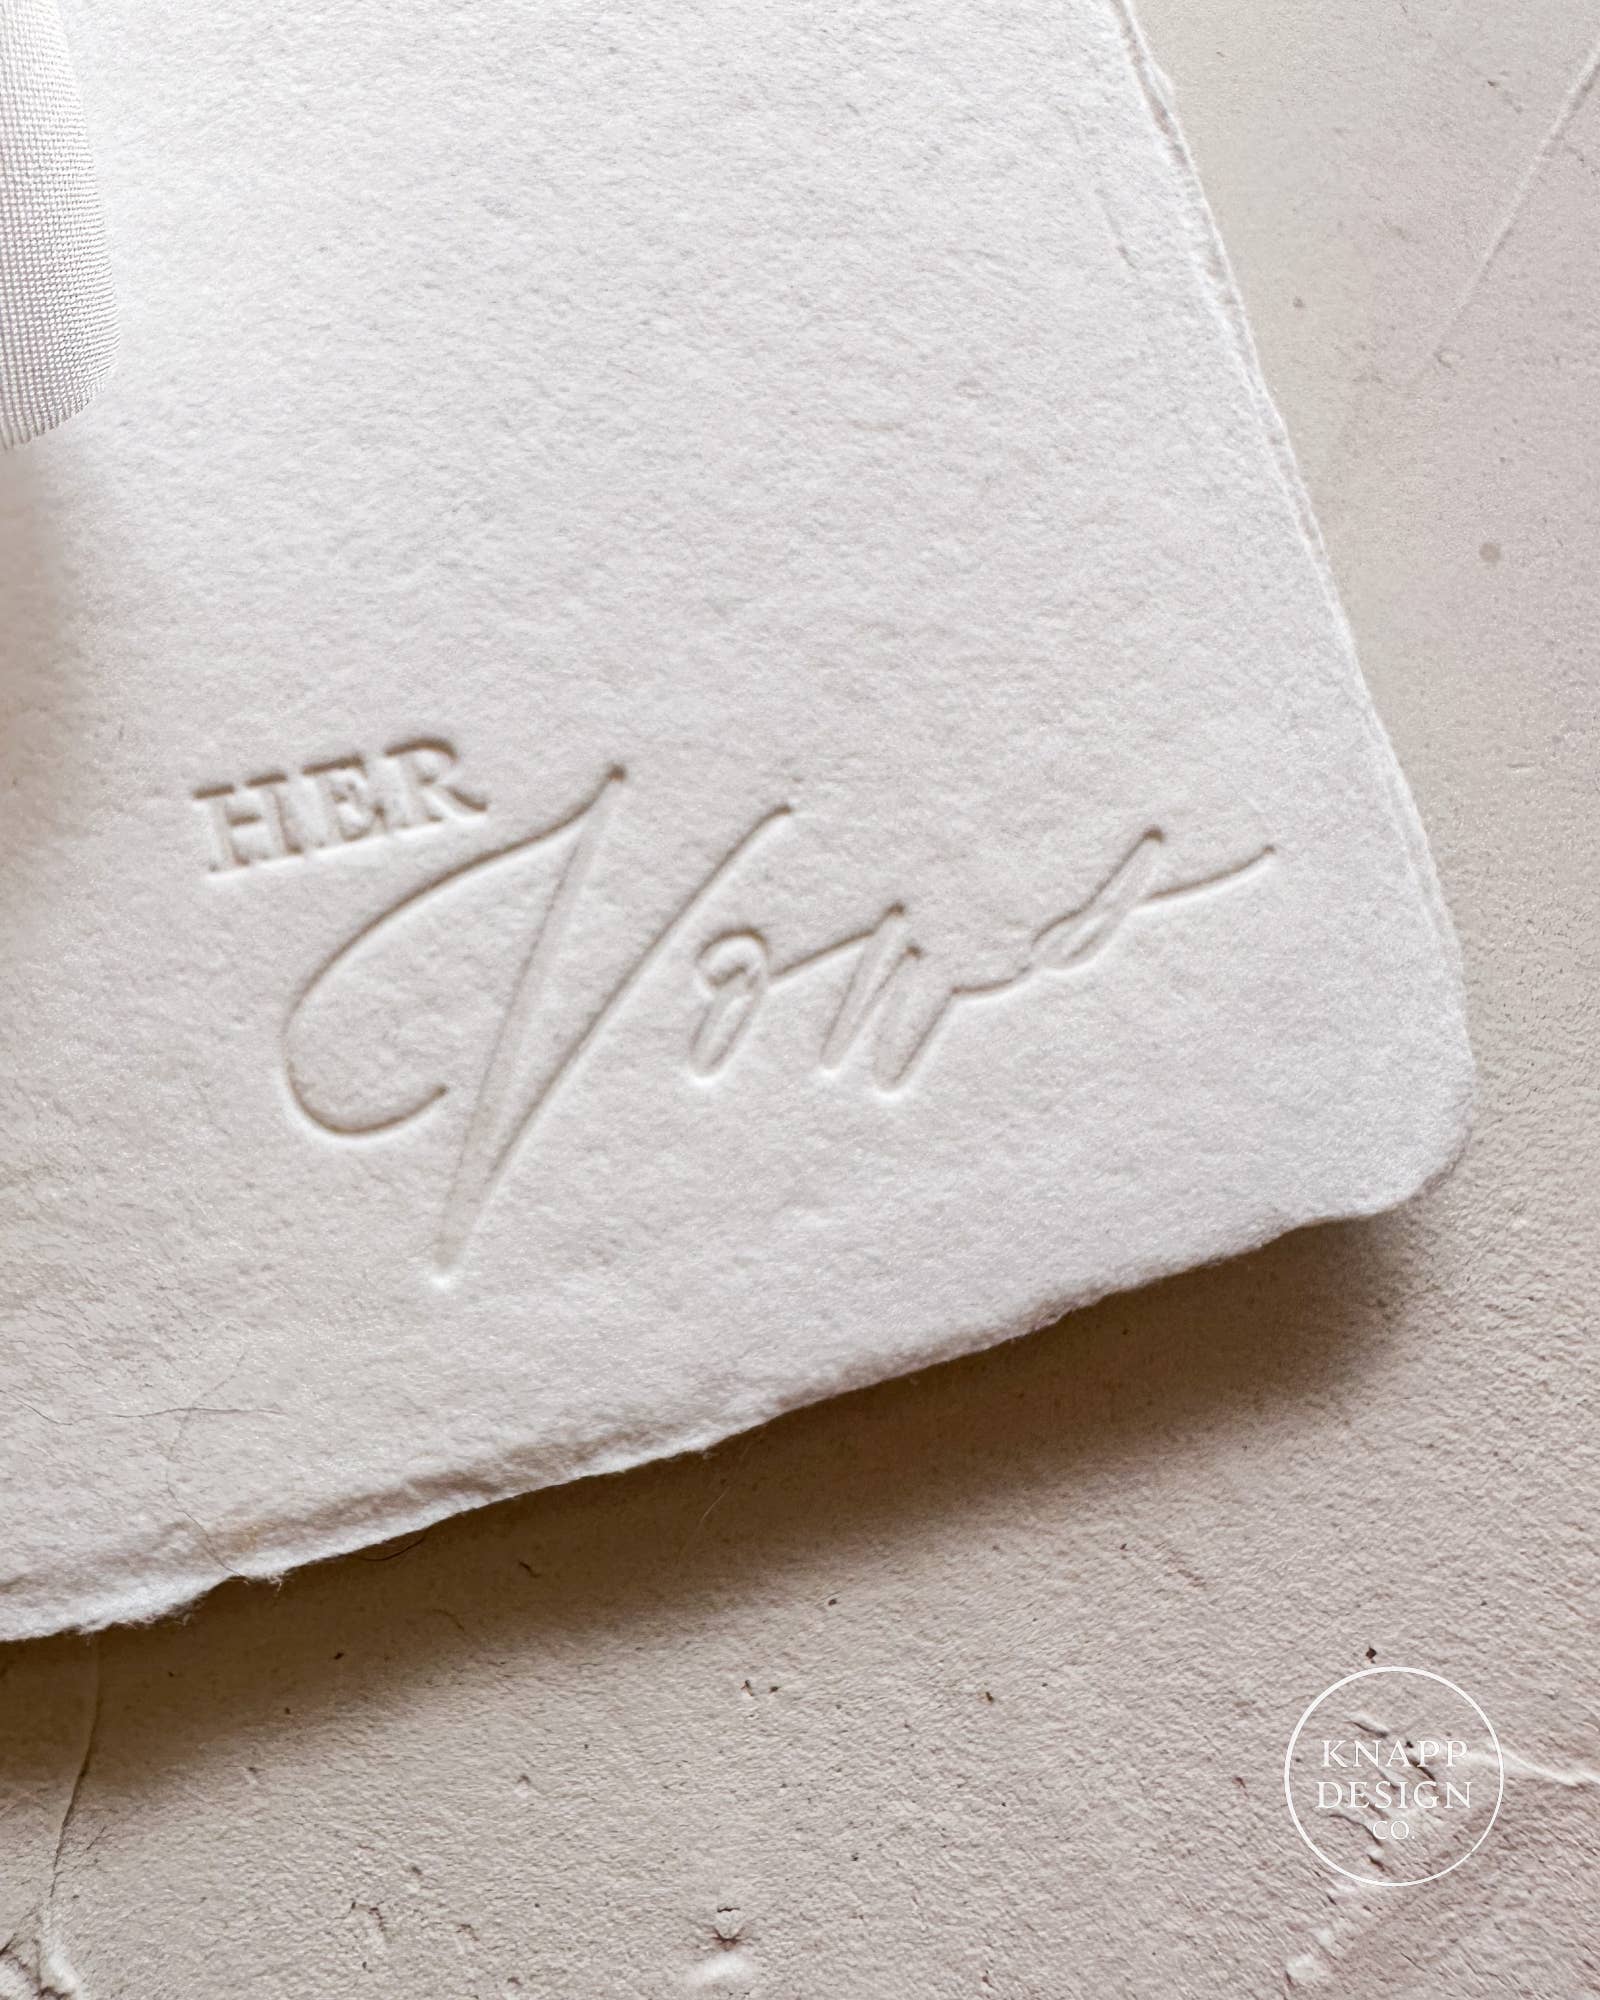 White vow book with white ribbon and 